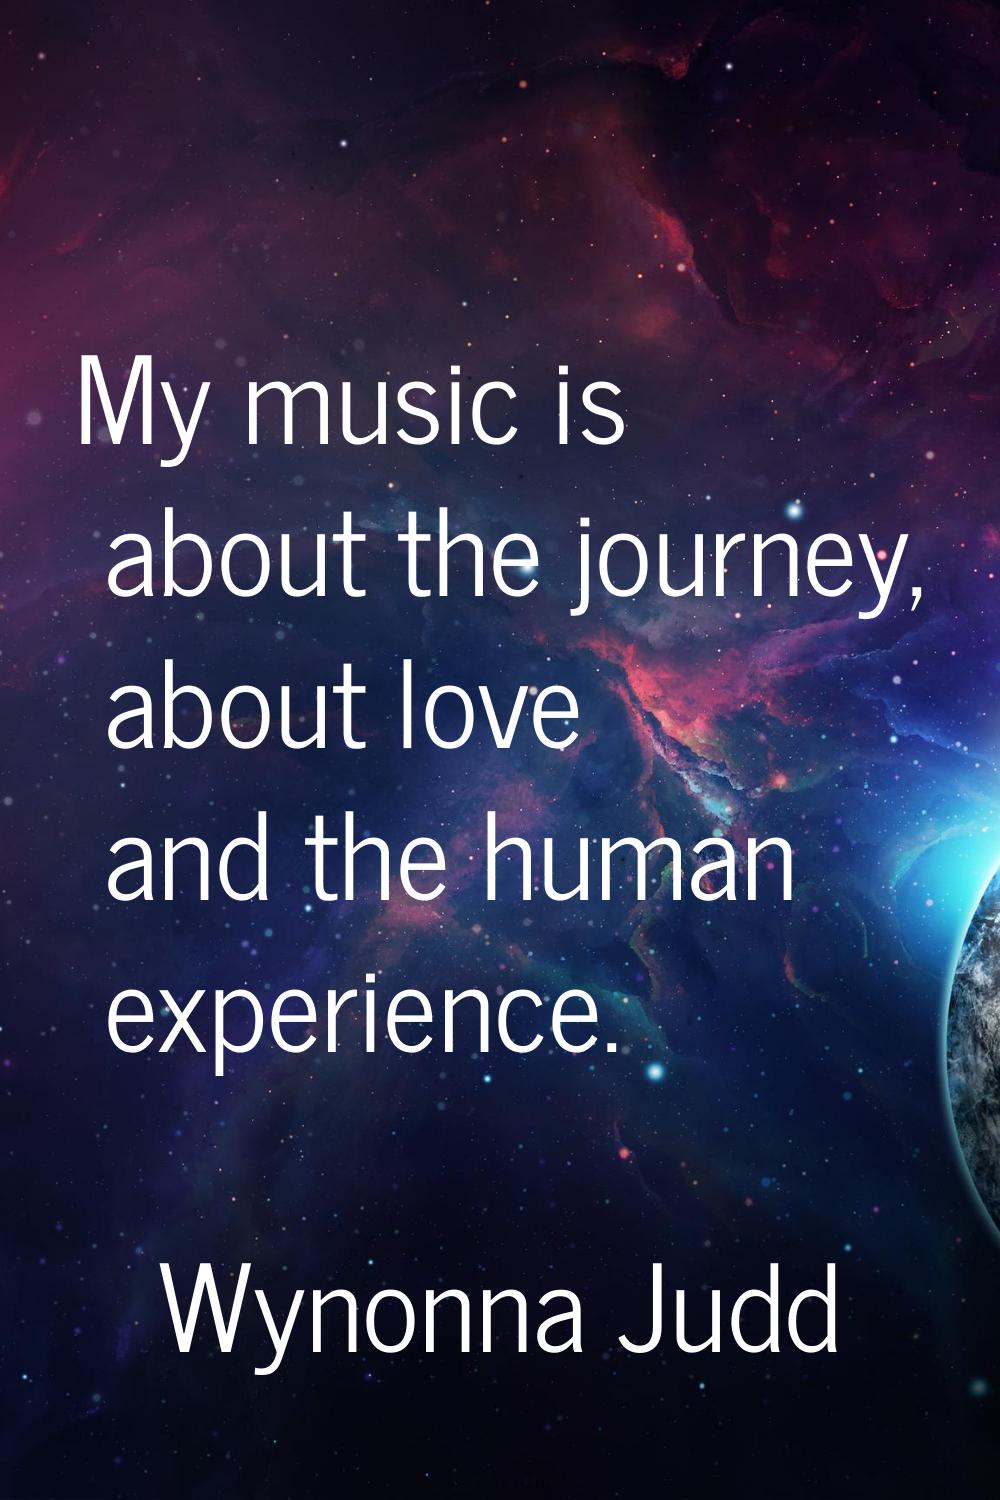 My music is about the journey, about love and the human experience.